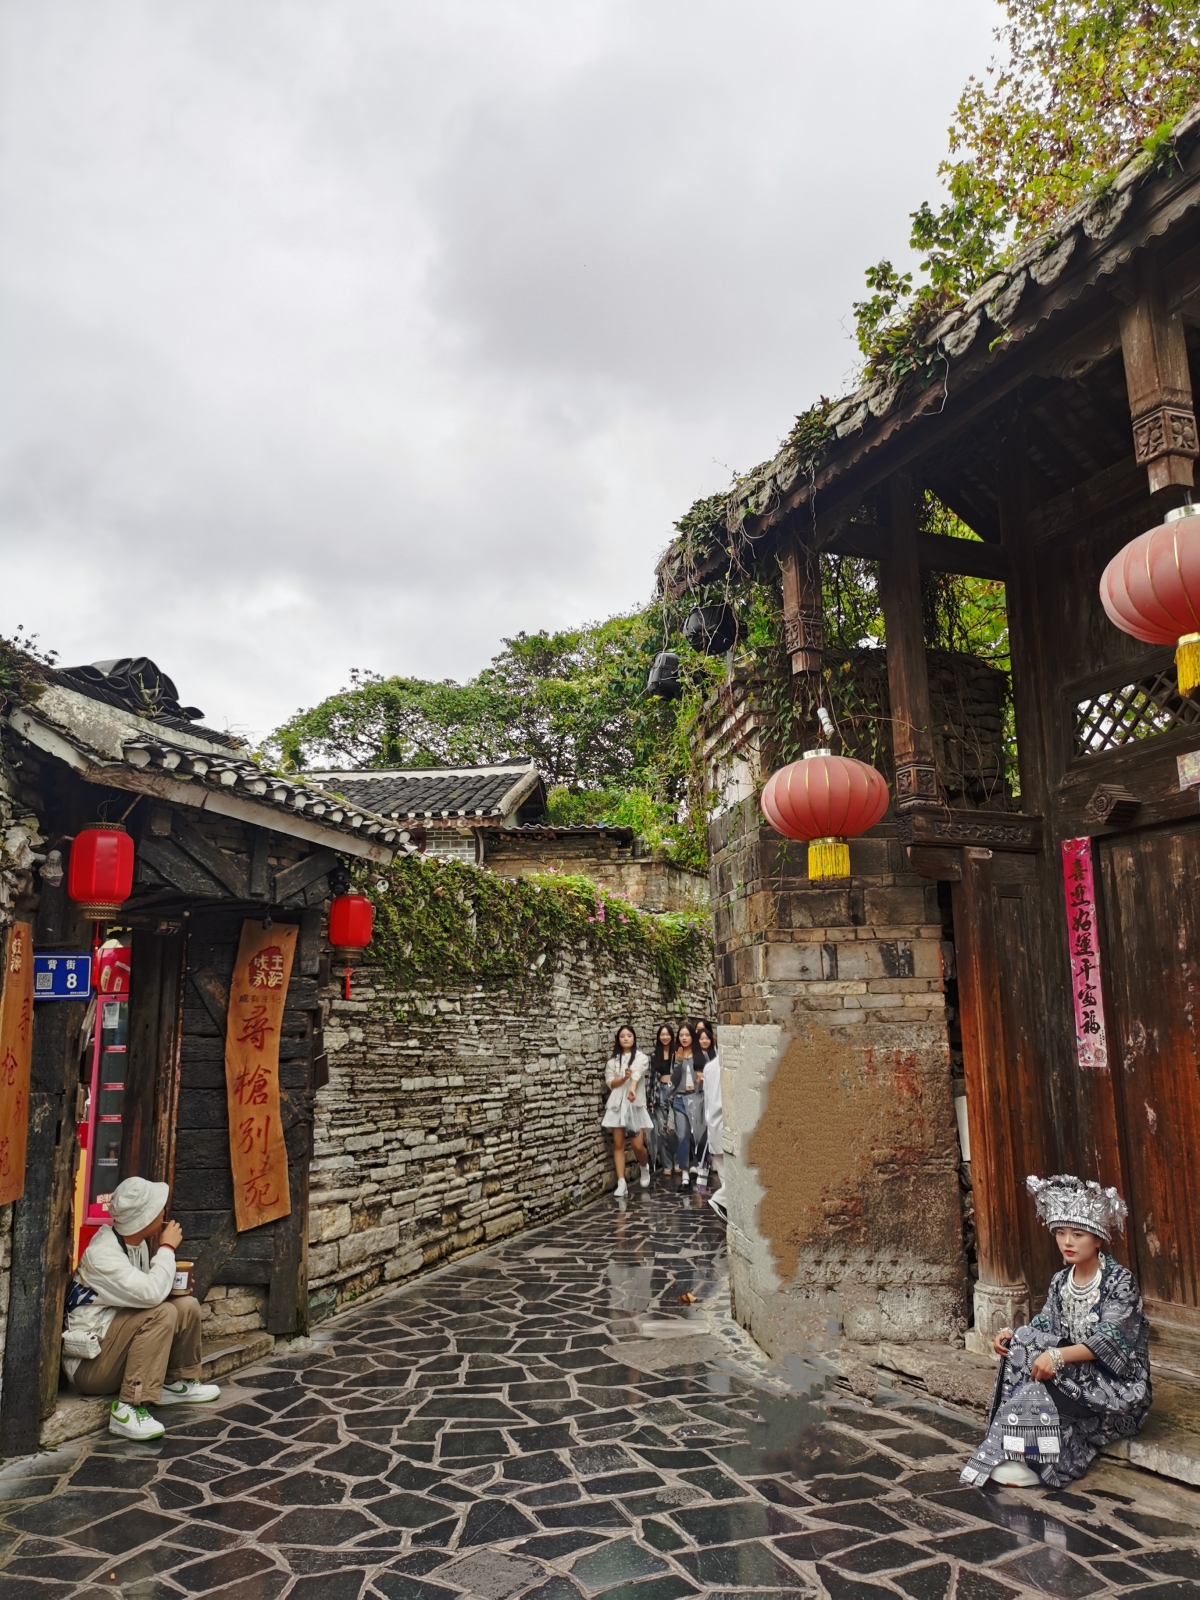 Tourists visit Qingyan ancient town in Guiyang, southwest China's Guizhou Province, on August 28, 2023. /CGTN